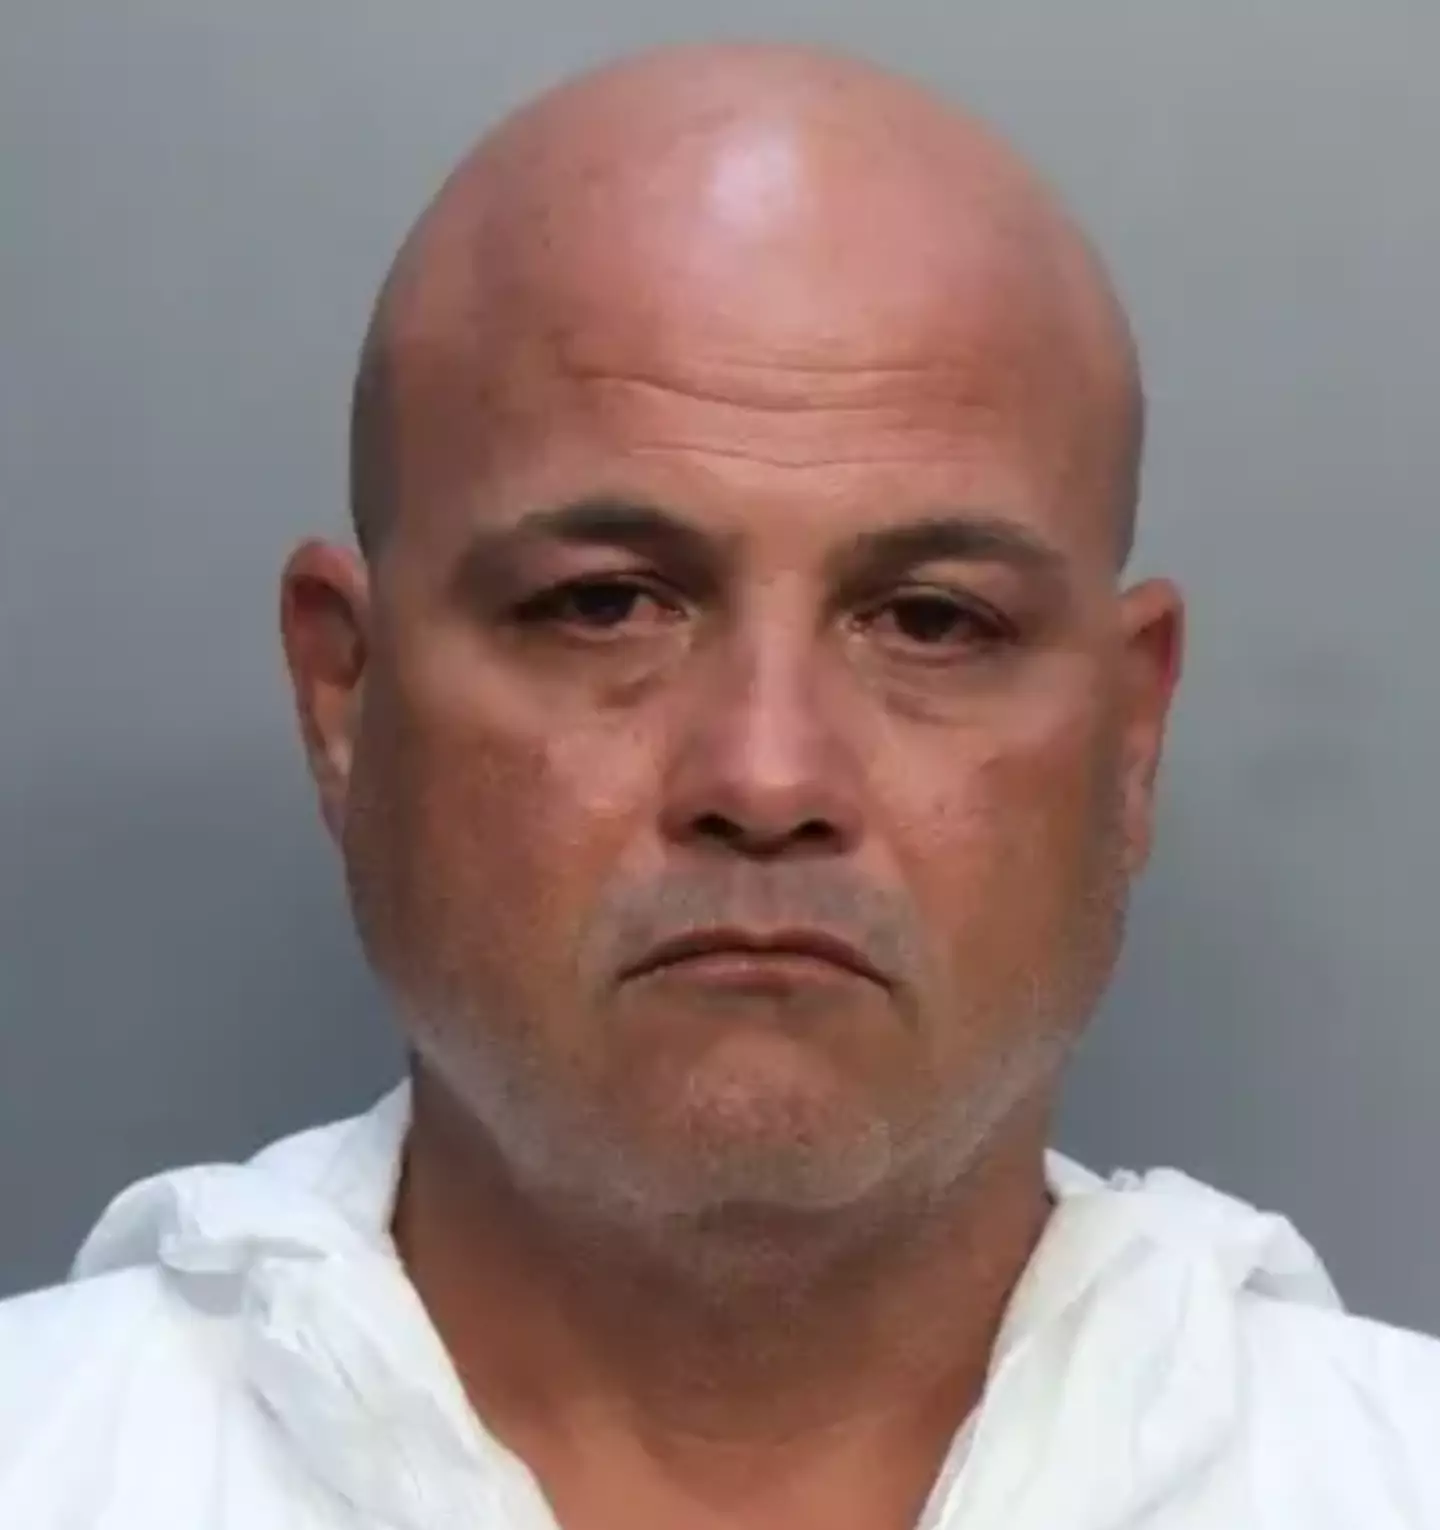 David Contreras was arrested last year after being accused of fatally shooting his son.